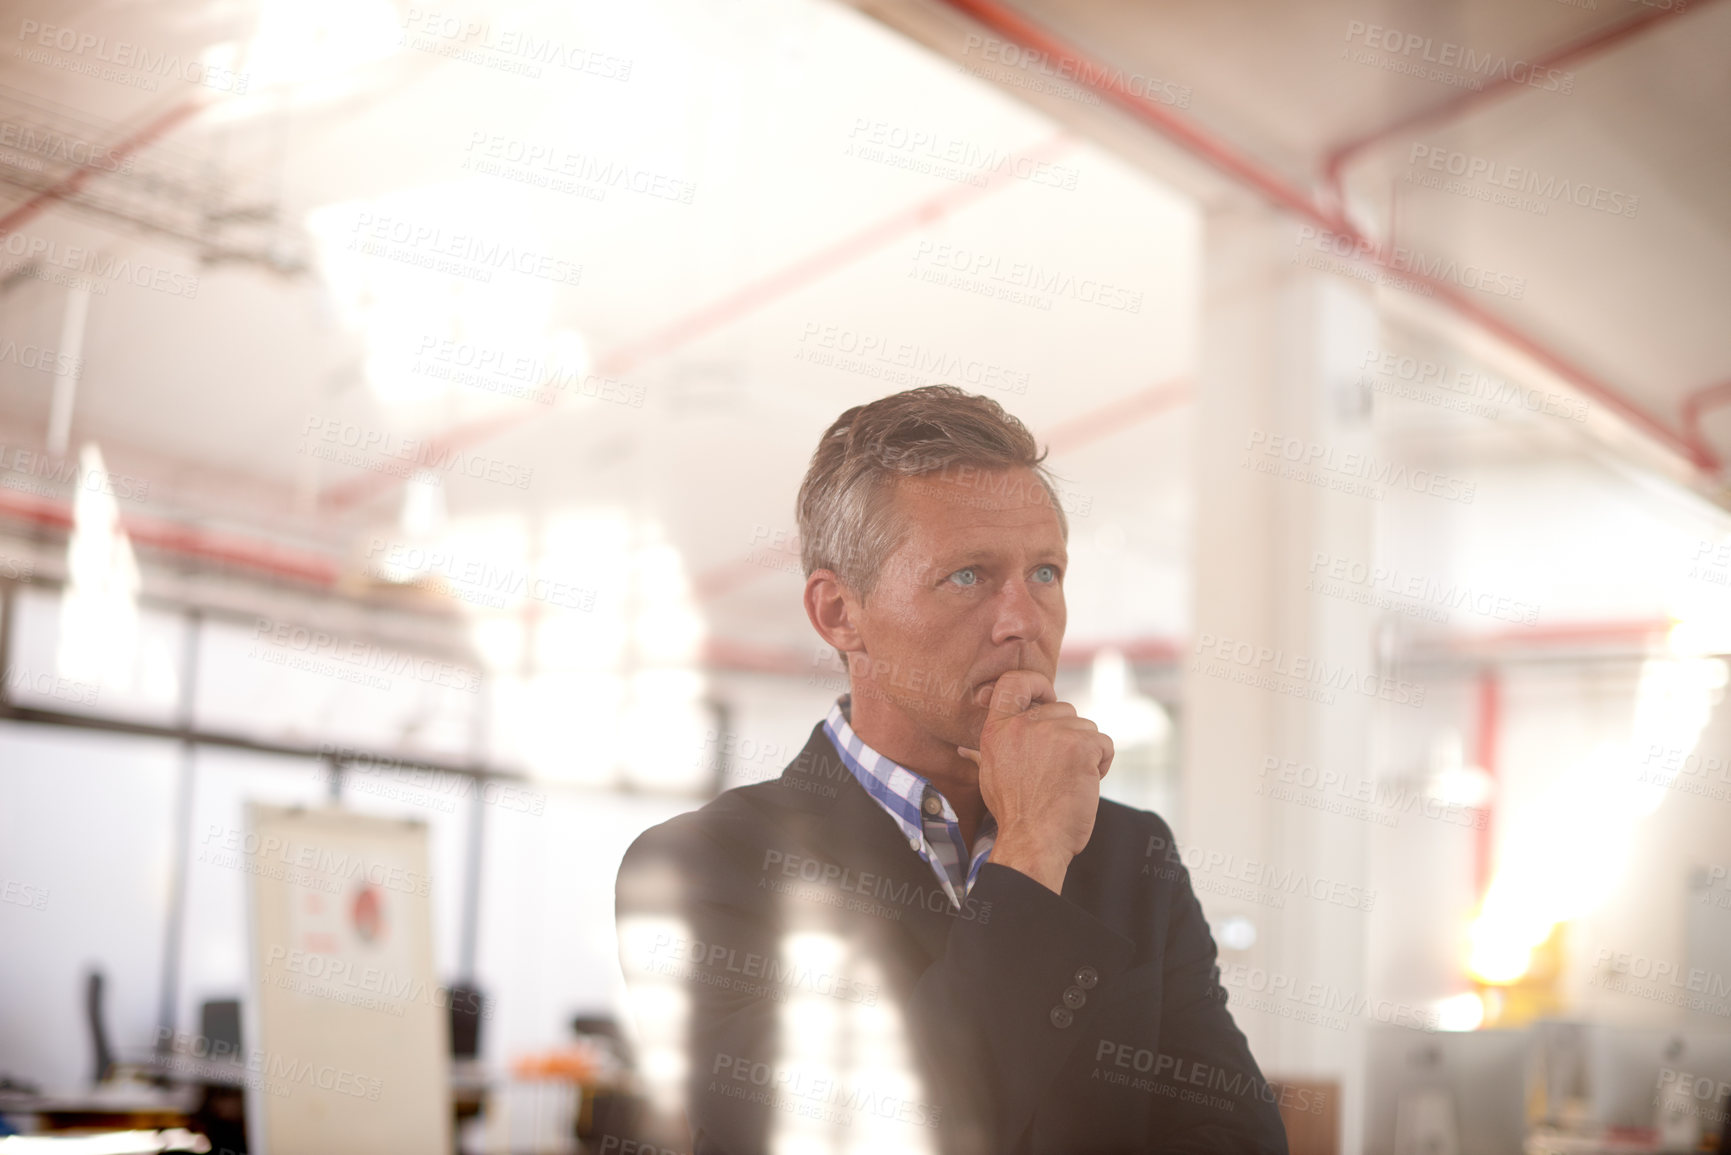 Buy stock photo Cropped through-the-window shot of a businessman standing in an office